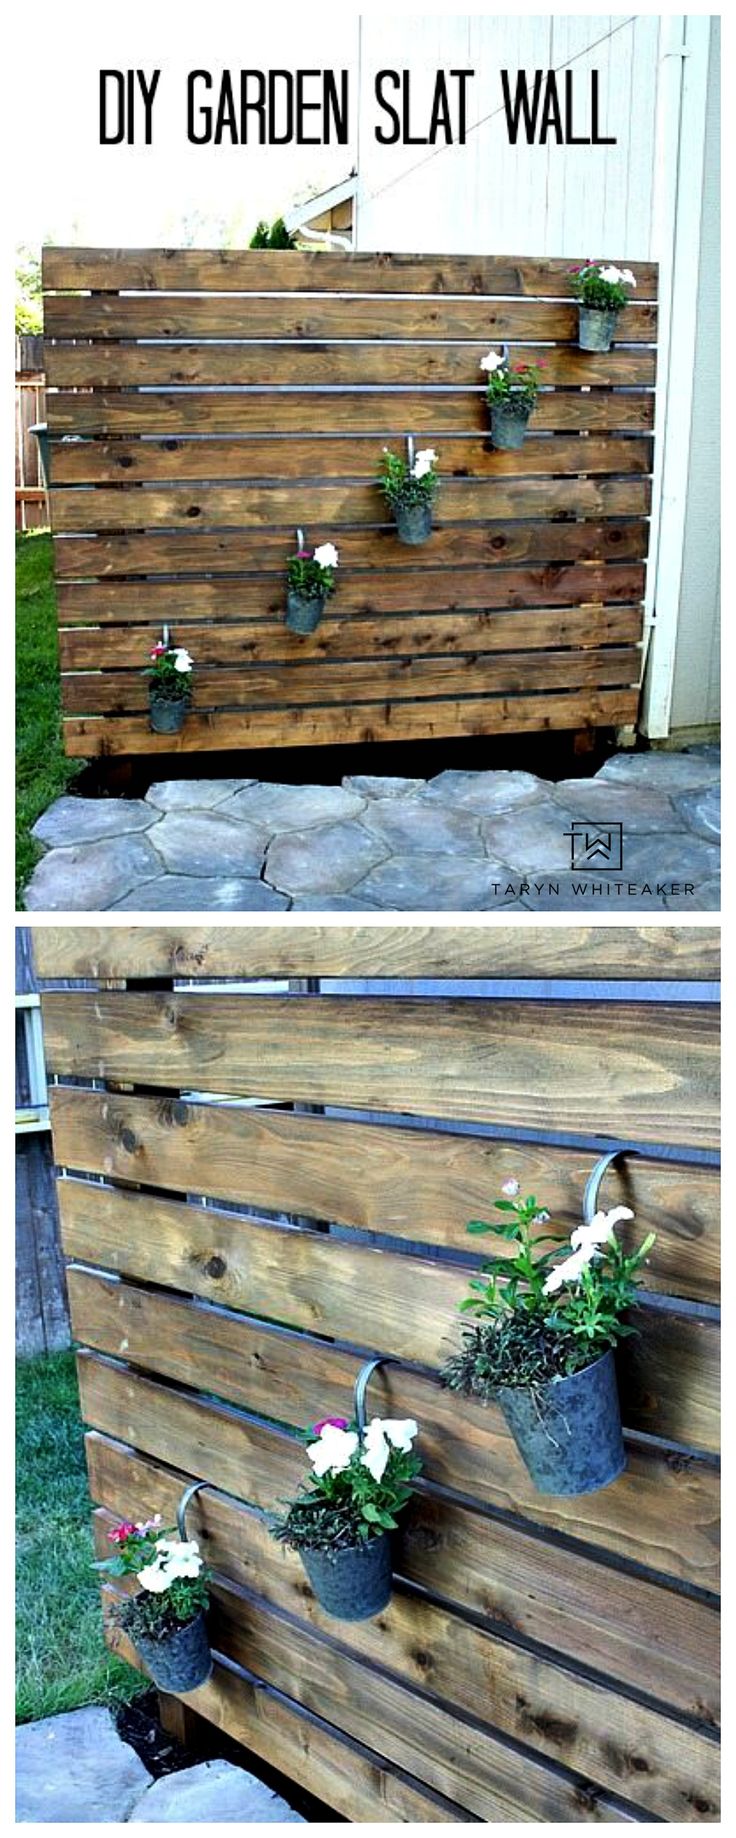 Here's a quick weekend project to help spruce up your back patio! Build this...